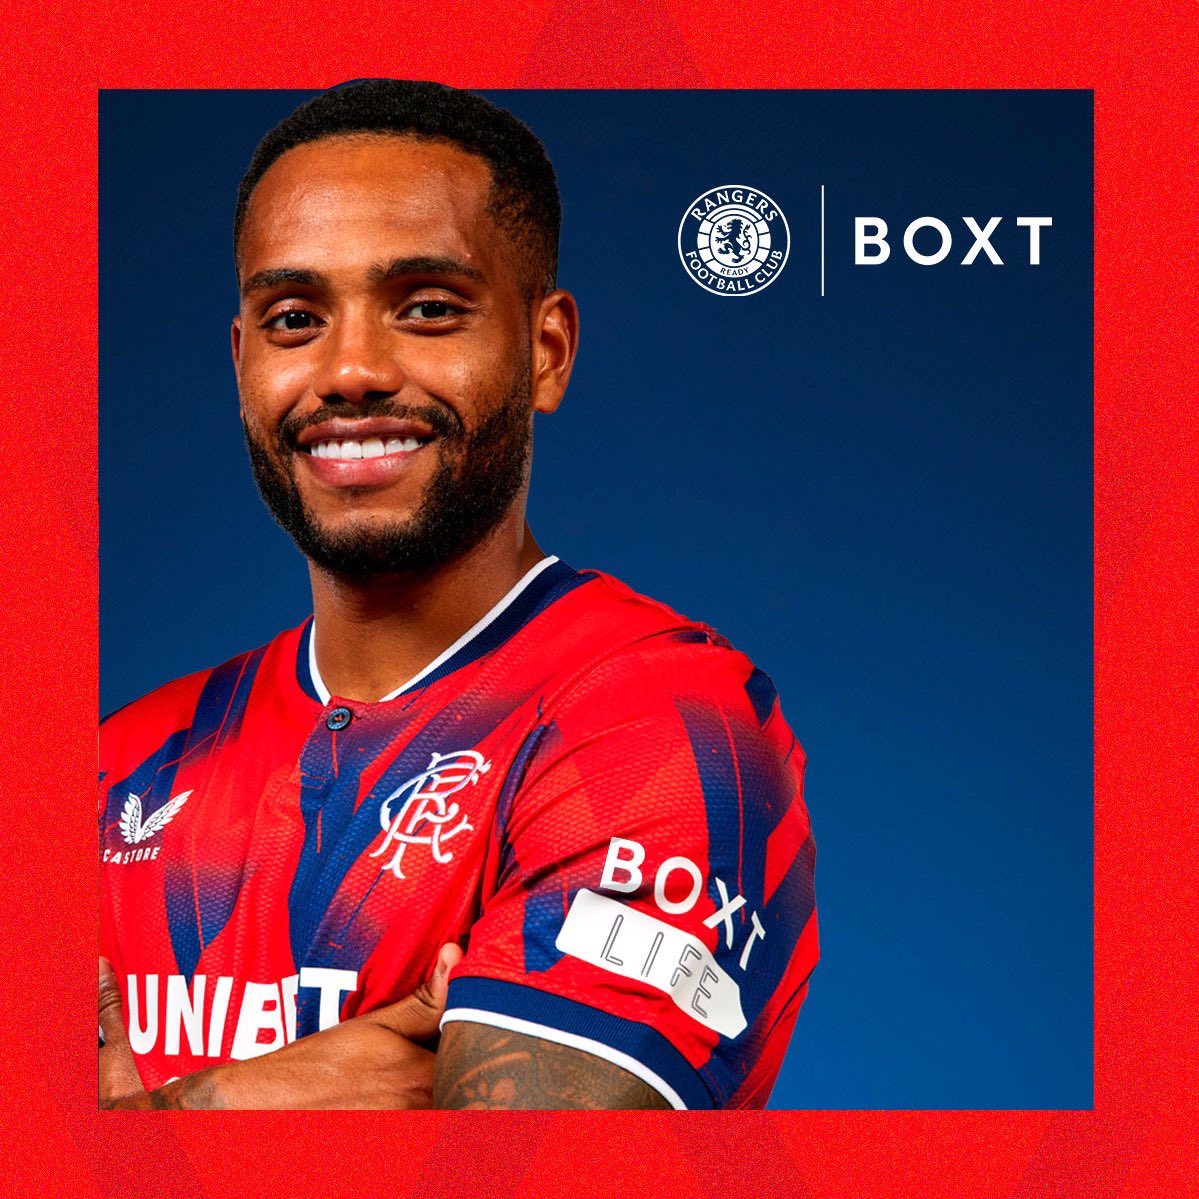 WIN WITH BOXT 👀 In true BOXT style, we’re giving away the new fourth kit AND two tickets to a @RangersFC game of your choice! Here’s how to enter👇 ✅Like & tag your friends (unlimited tags!) ✅You must be following @weareboxt ✅Retweet Competition ends 9/10/23 - T&C’s